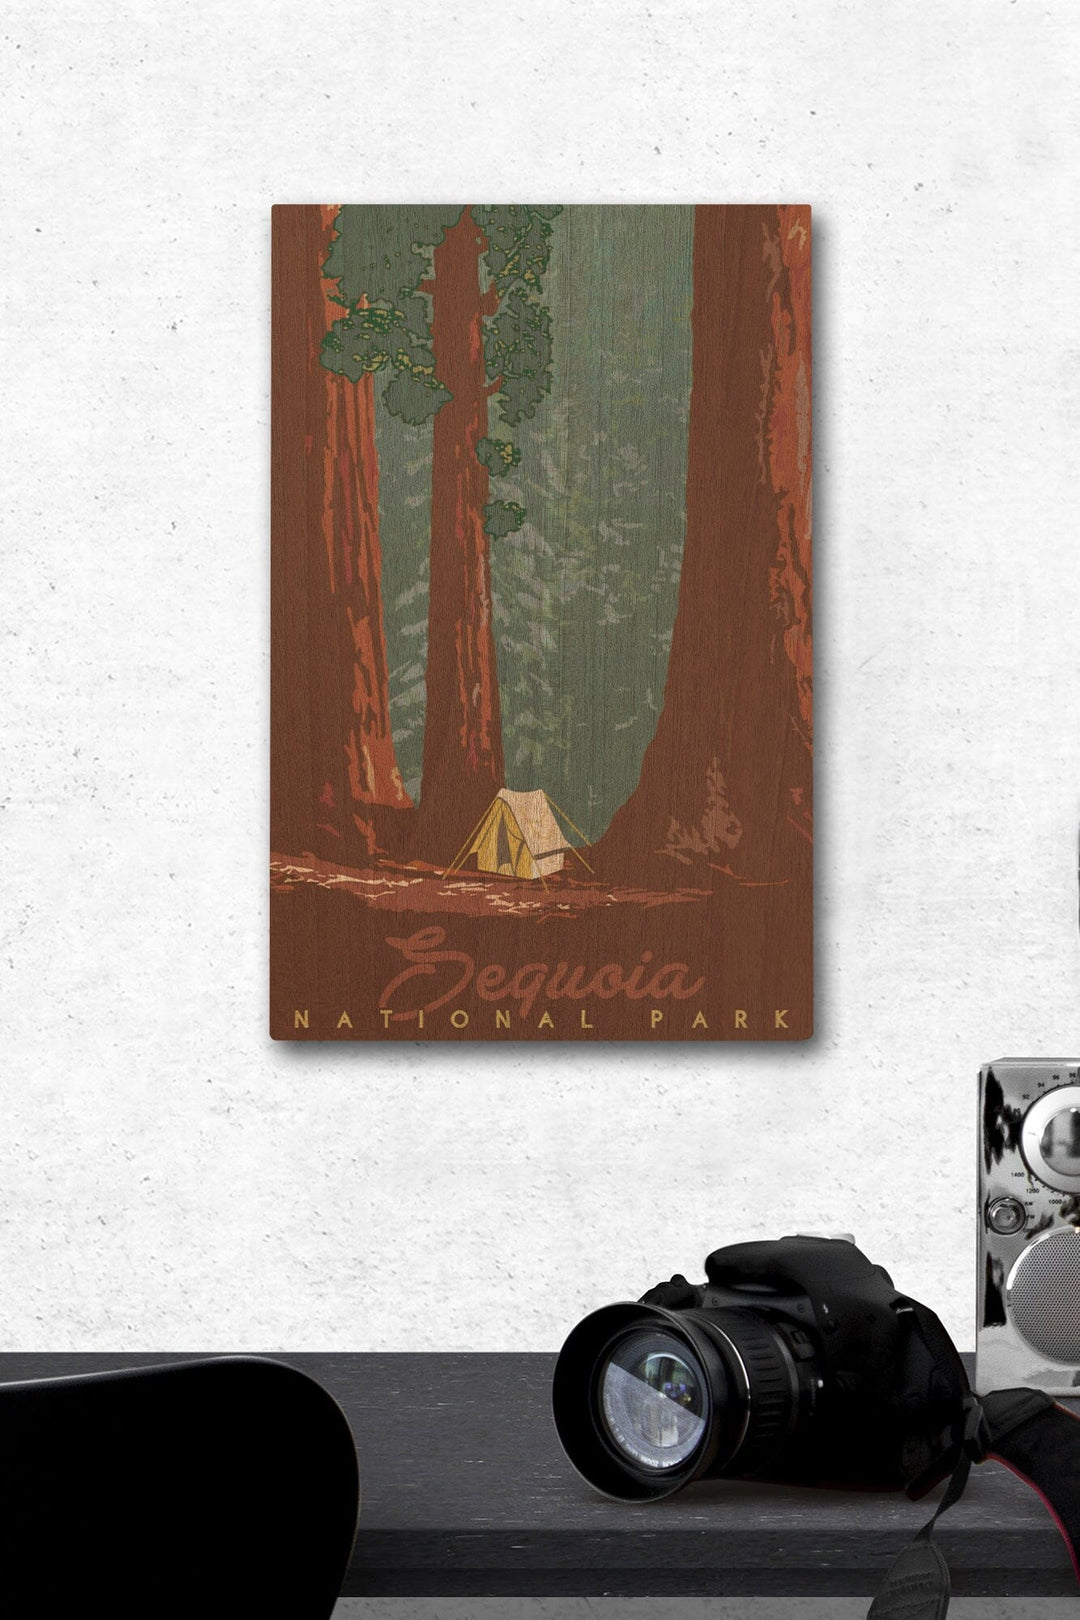 Sequoia National Park, California, Redwood Forest View, Sequoias & Tent, Lantern Press Artwork, Wood Signs and Postcards Wood Lantern Press 12 x 18 Wood Gallery Print 